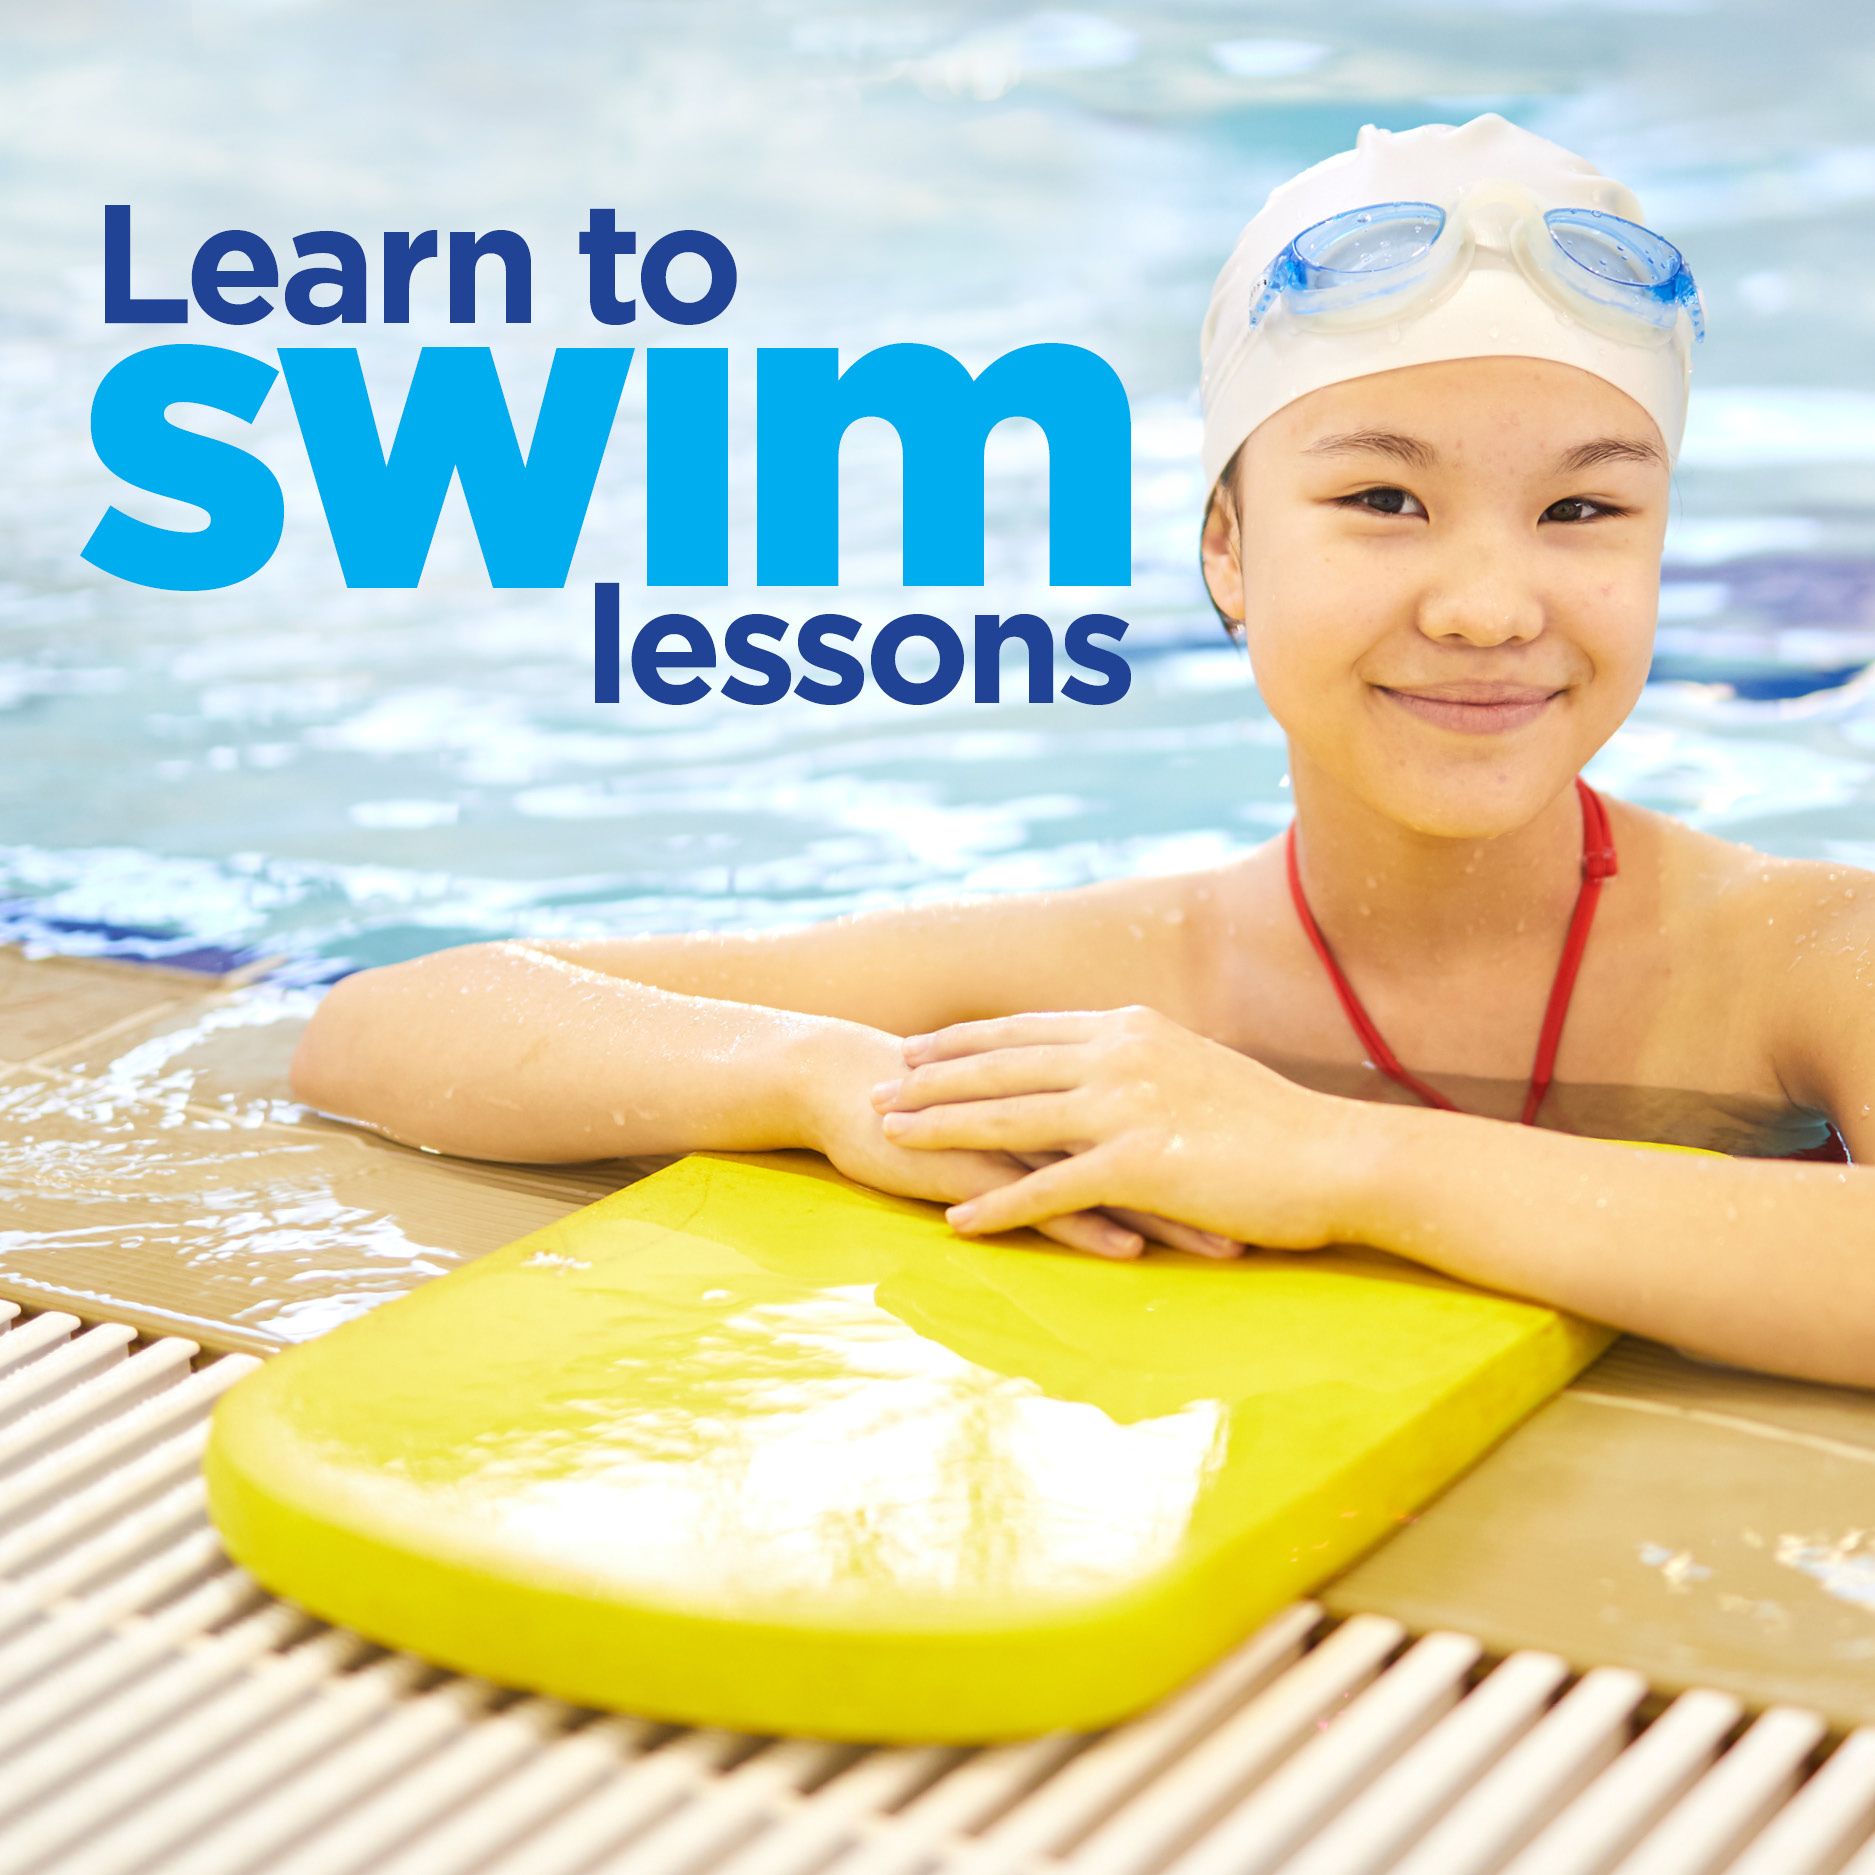 Learn to swim lessons